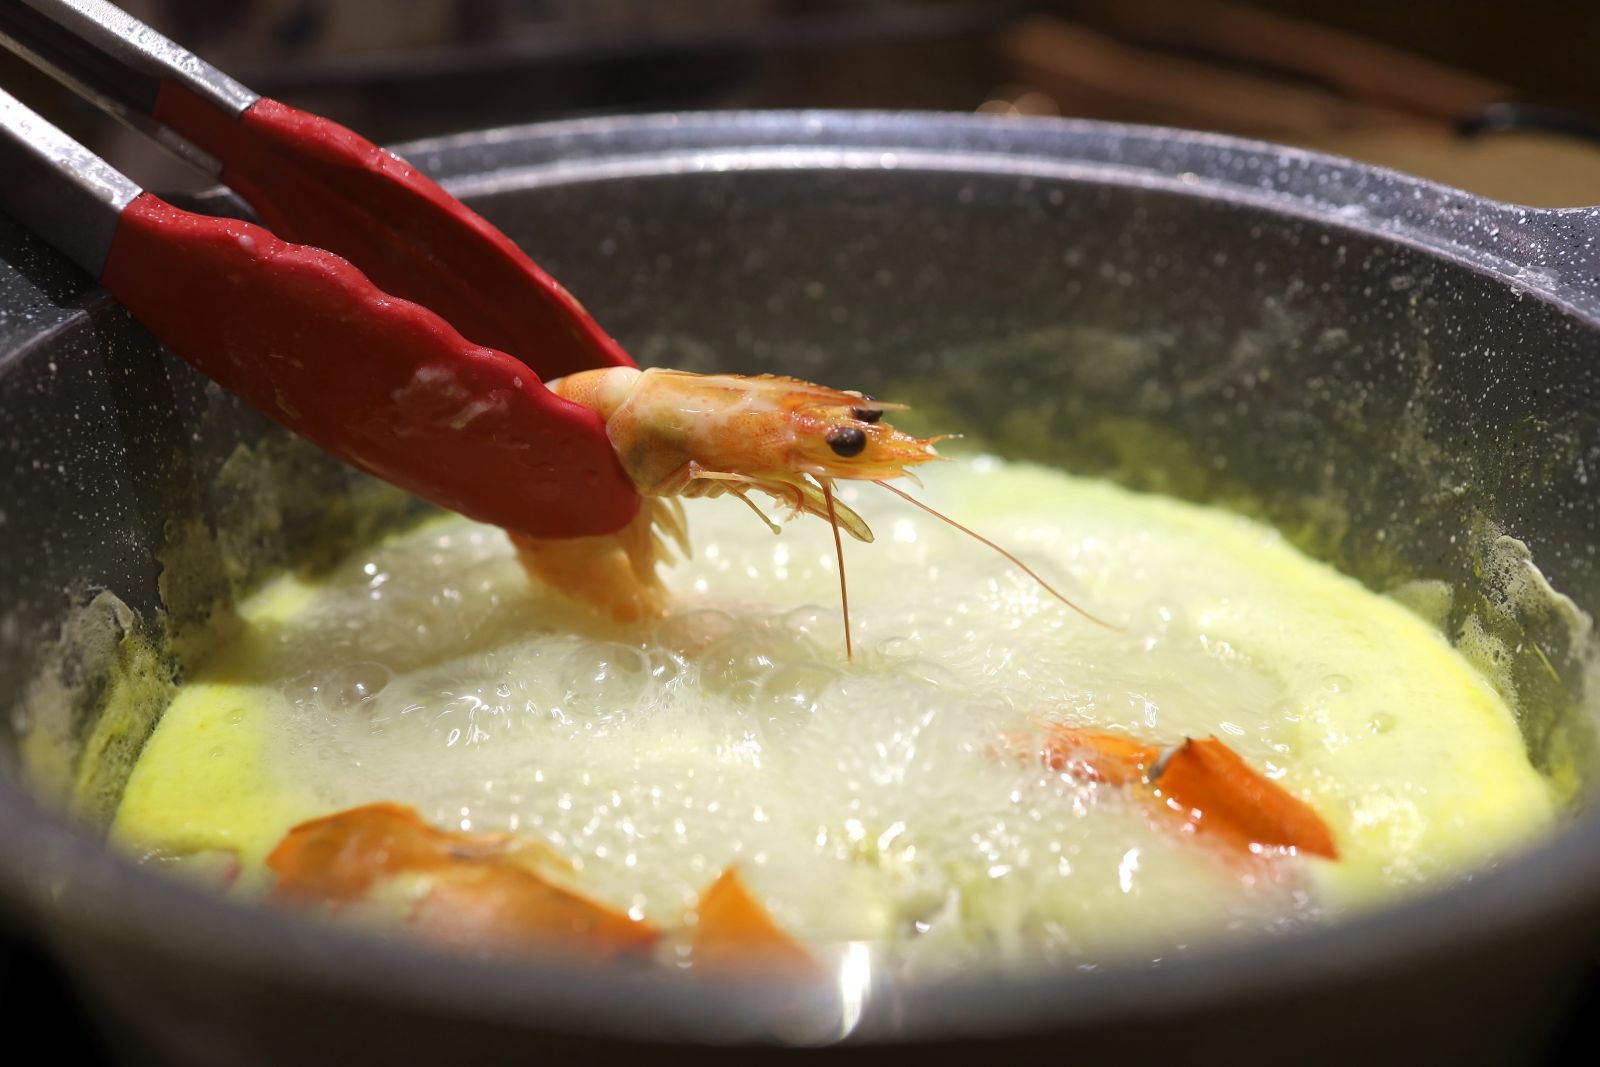 Seafood with congee based hot pot